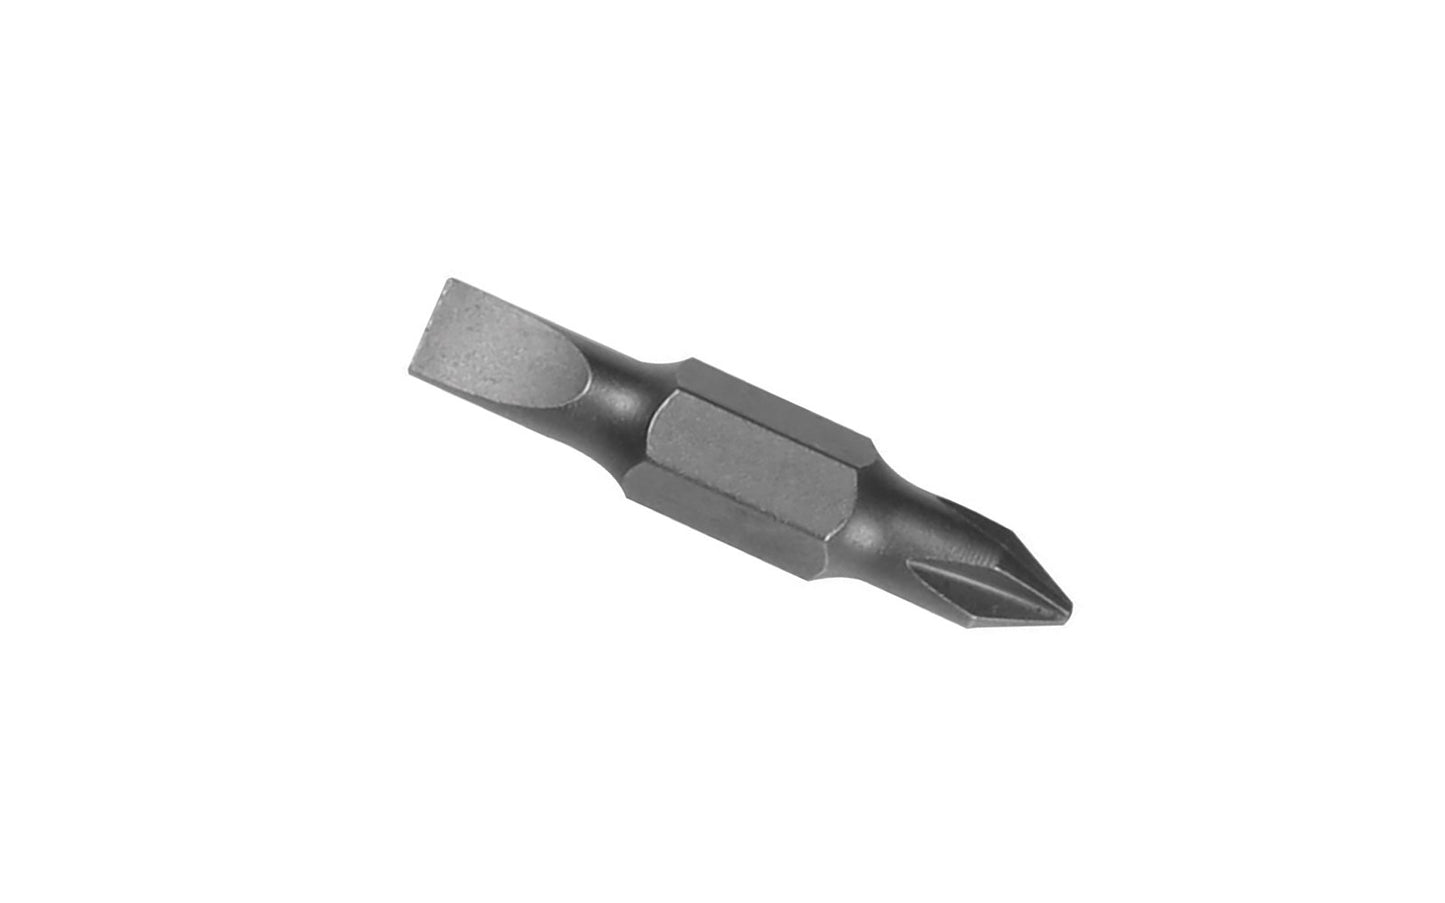 Klein Tools - Made in USA - Model No. 32482 - No. 1  Phillips - #1 Phillips - 3/16" Slot - 3/16" Slotted - Fits the 11-in-1 (32500) and 10-in-1 (32477) Screwdriver/Nut Drivers - Precision-machined tips for exact fit into fastener - 2 pack - 2 bits - 0-in-1, 11-in-1 and 10-Fold™ Screwdriver/Nut Drivers - 092644324826